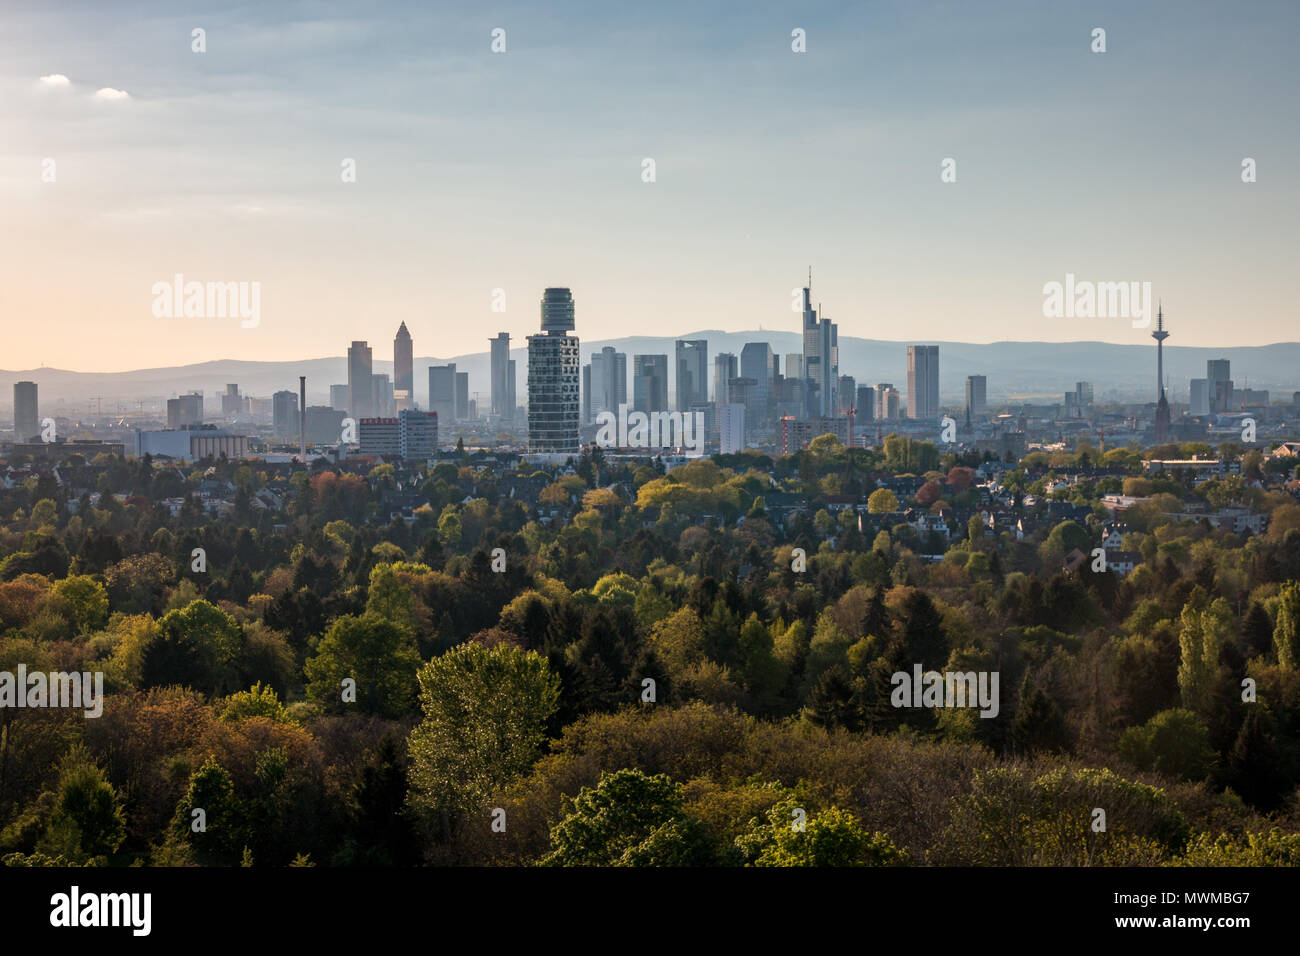 Cityscape with skyline of Frankfurt am Main seen from top of Goethetower which burned down completely after a fire in 2017 Stock Photo